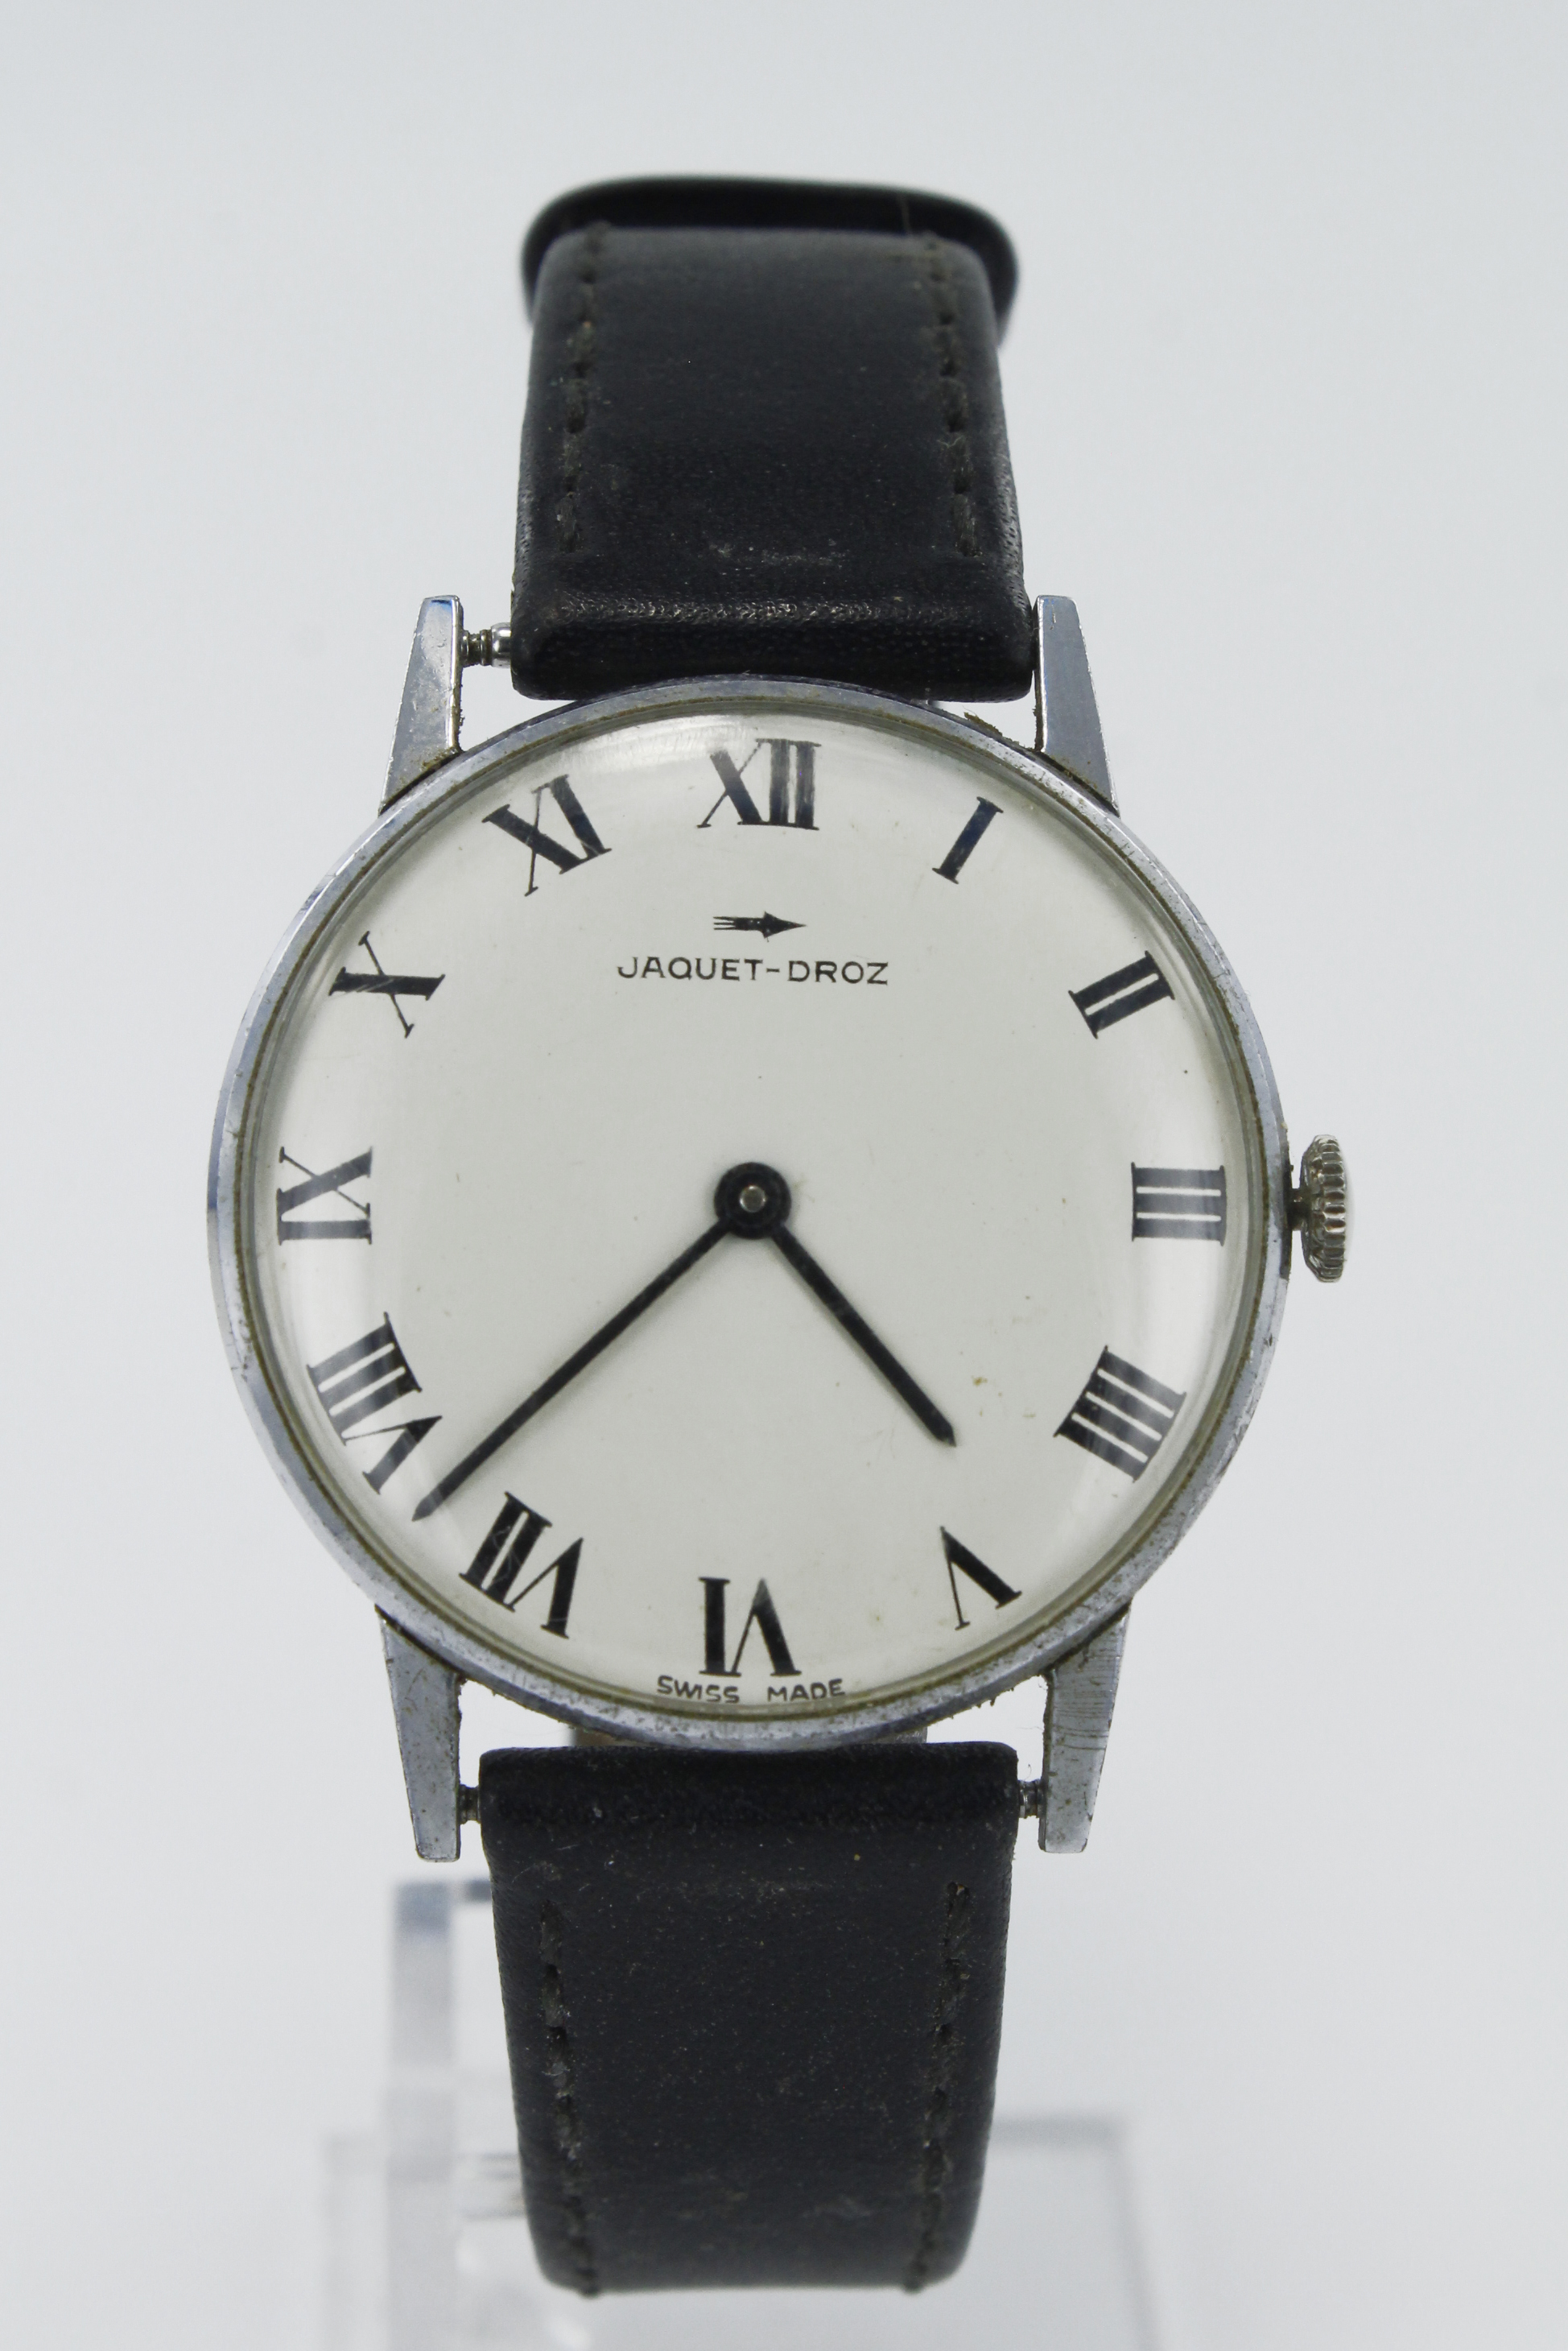 Gents stainless steel cased Jaquet-Droz manual wind wristwatch. The white enamel dial with Roman